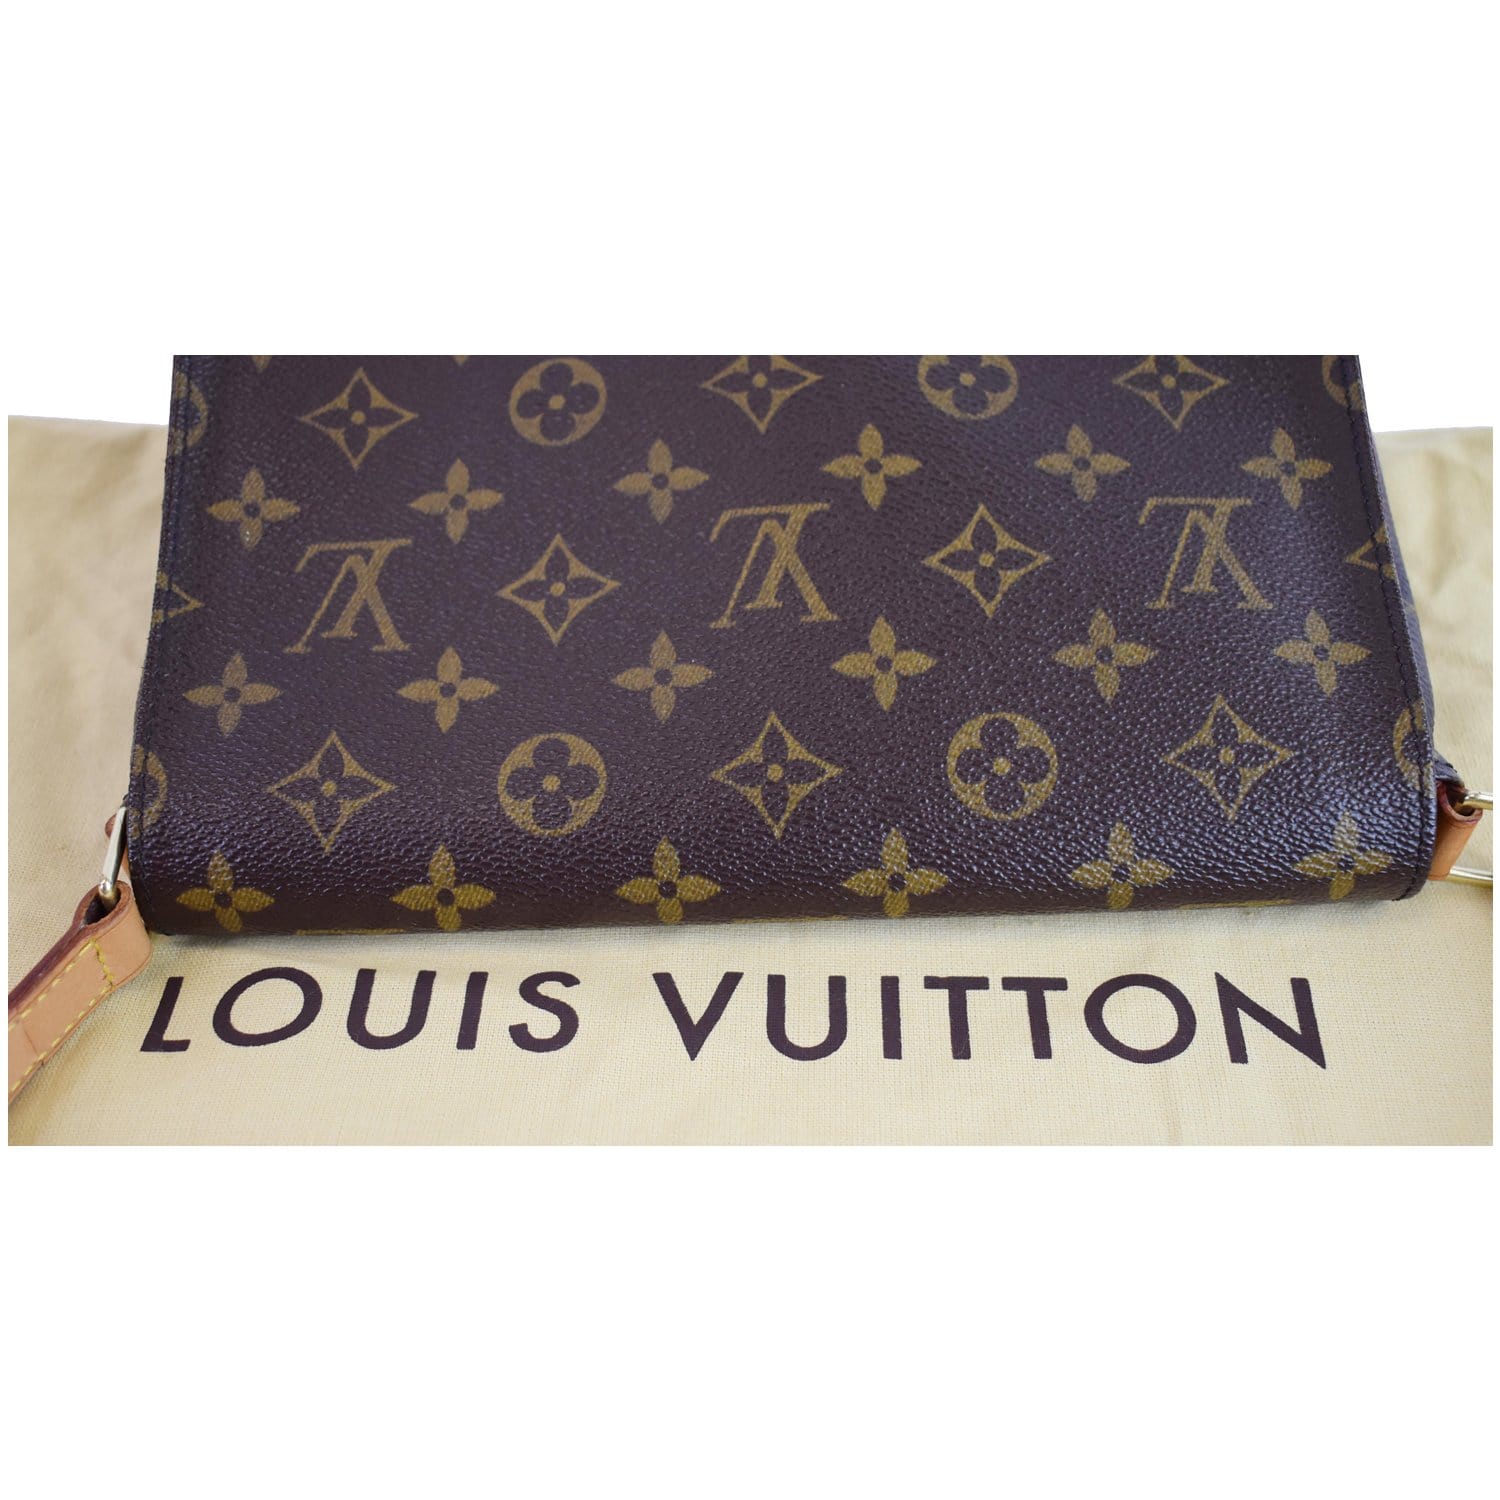 ♻️previously owned Louis Vuitton Musette tango! Great condition